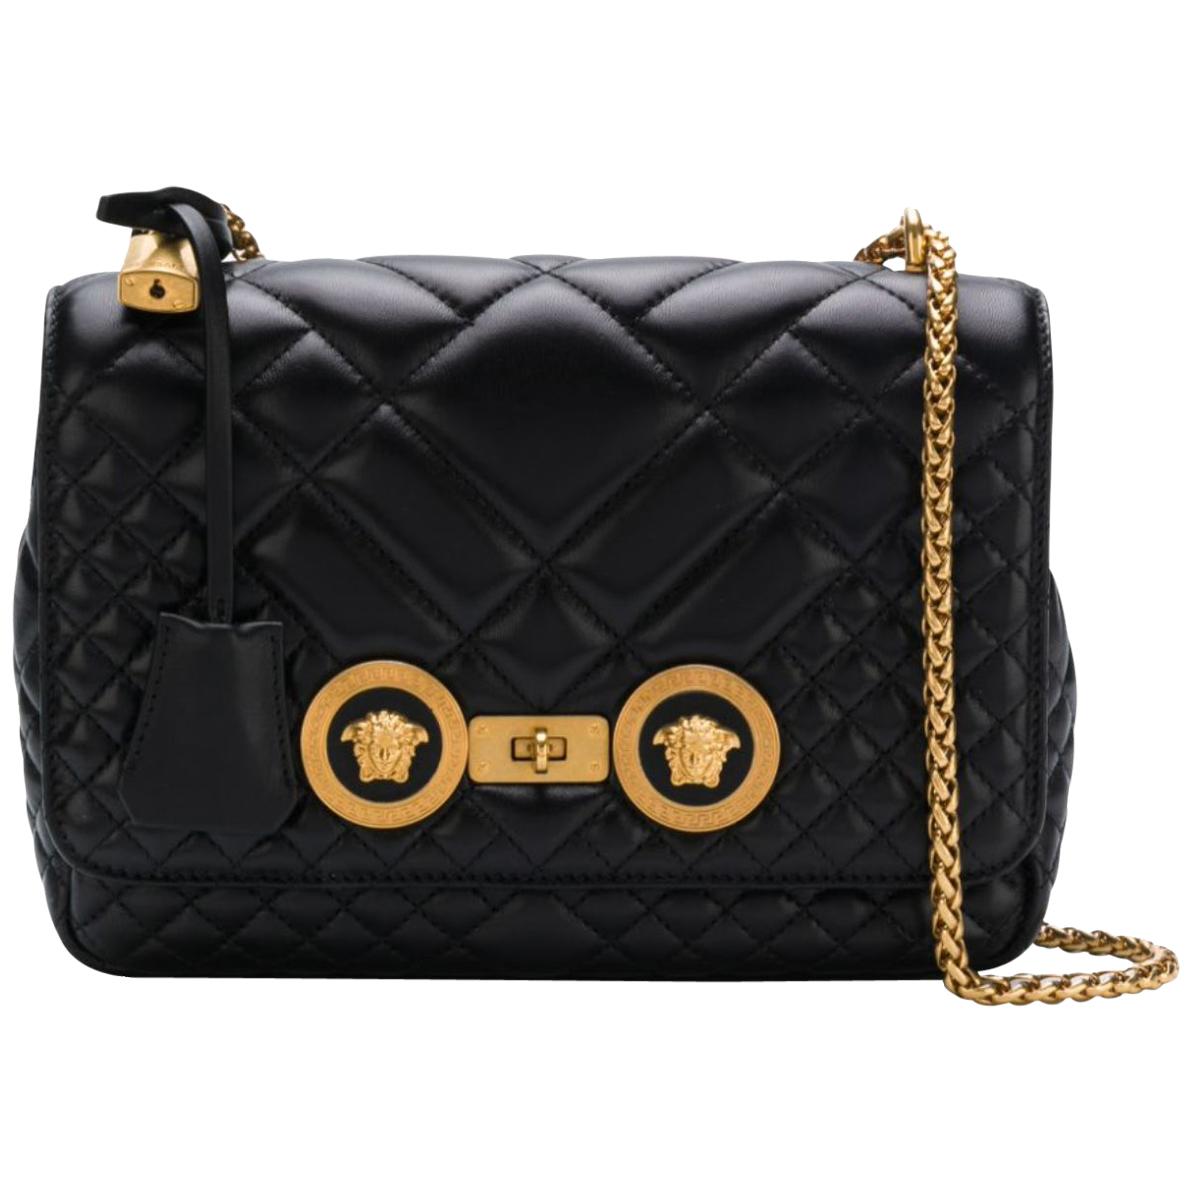 Versace Black Quilted Leather Icon Shoulder Bag with a Gold-Tone